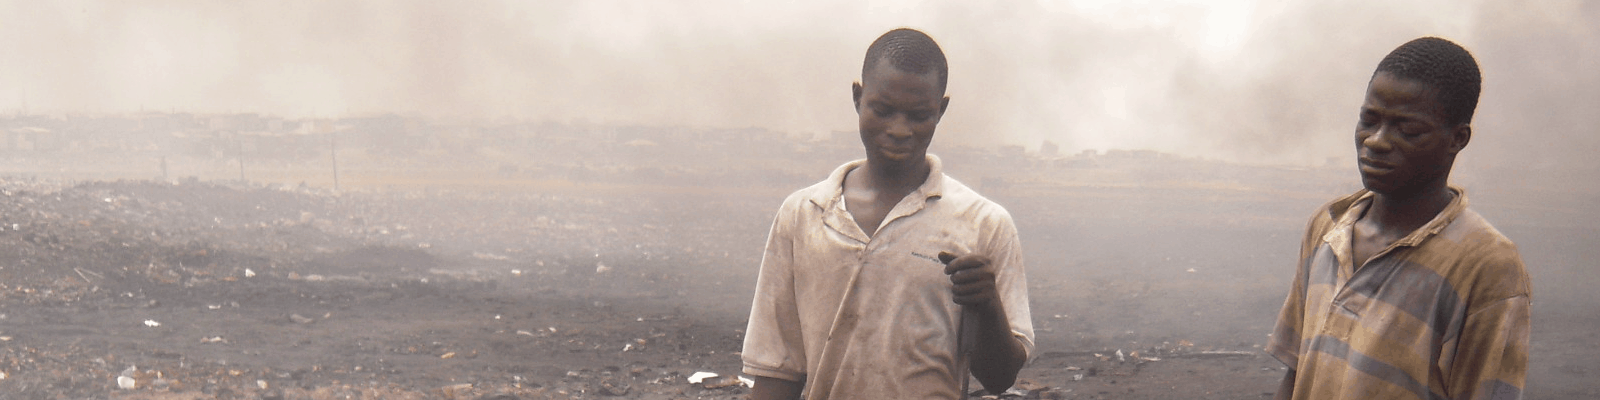 Agbogbloshie in Ghana. Here plastic components of dumped electronic waste is burned to “reclaim'